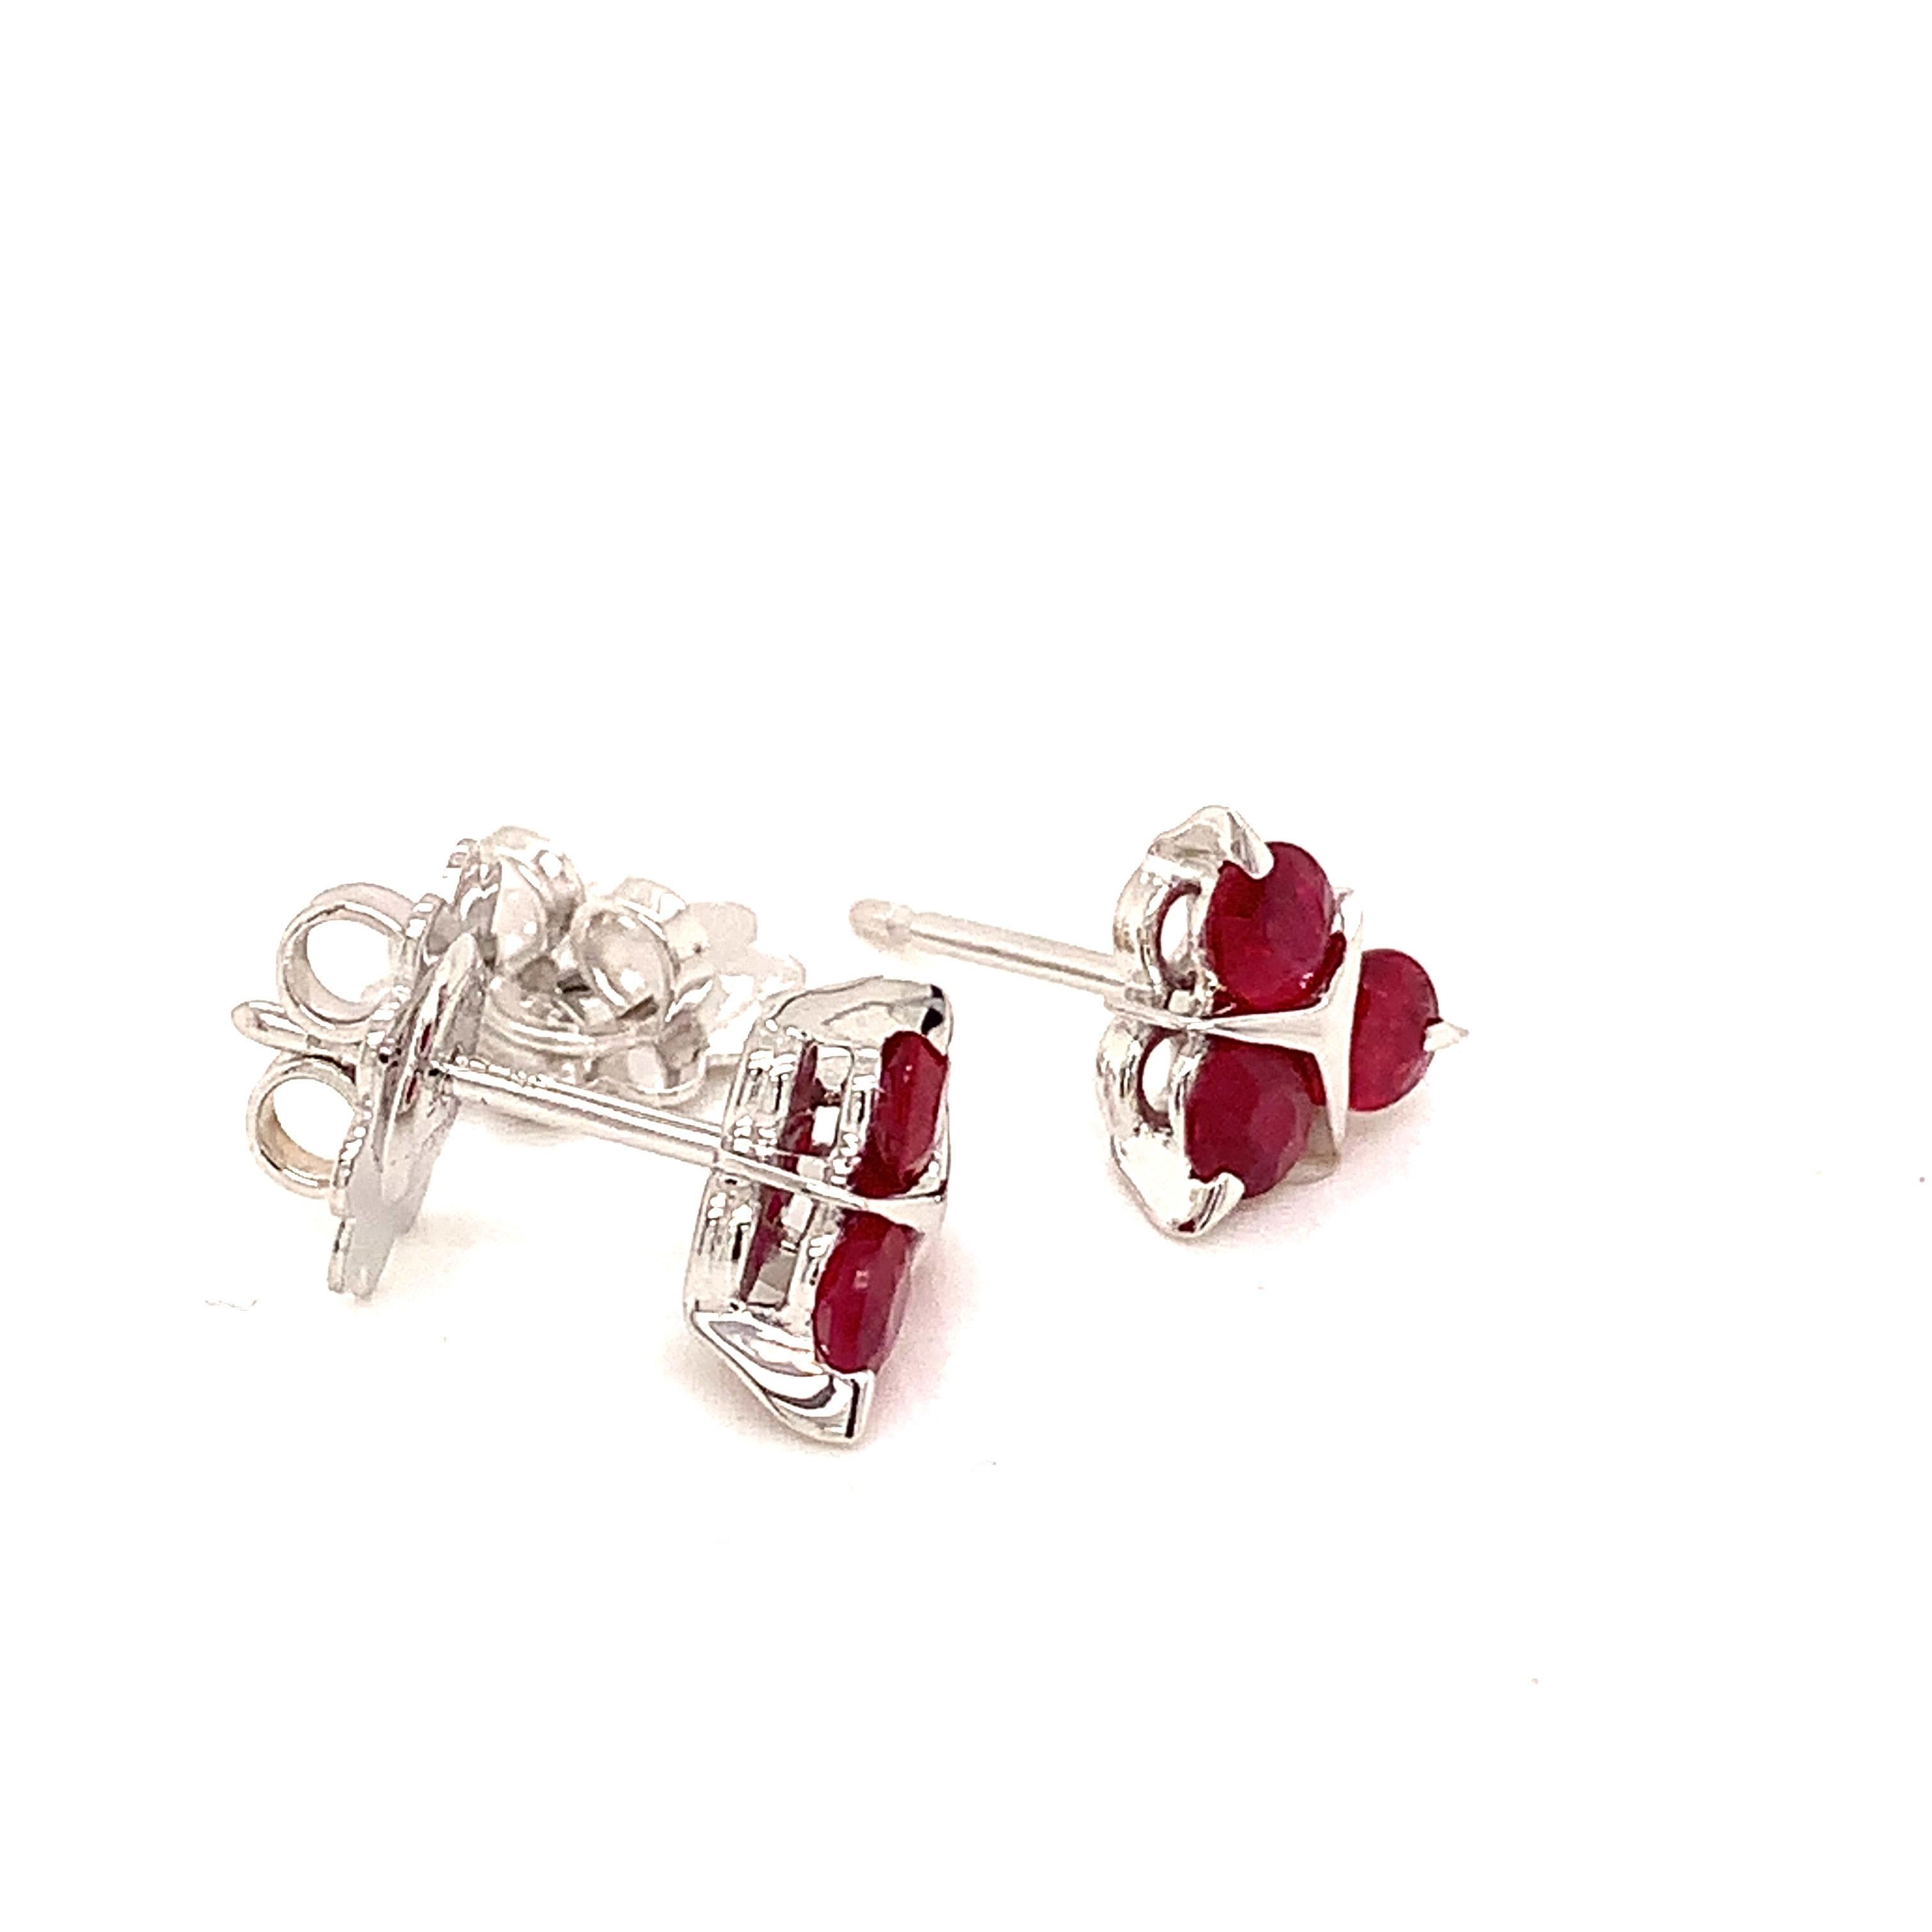 Garavelli earrings   in  very unique and pretty design, in white gold 18 kt with six perfect round rubies to a total carat weight of 1.26
 Available also in diamonds, brown diamonds, black diamonds, sapphires, emeralds. Matching pendant